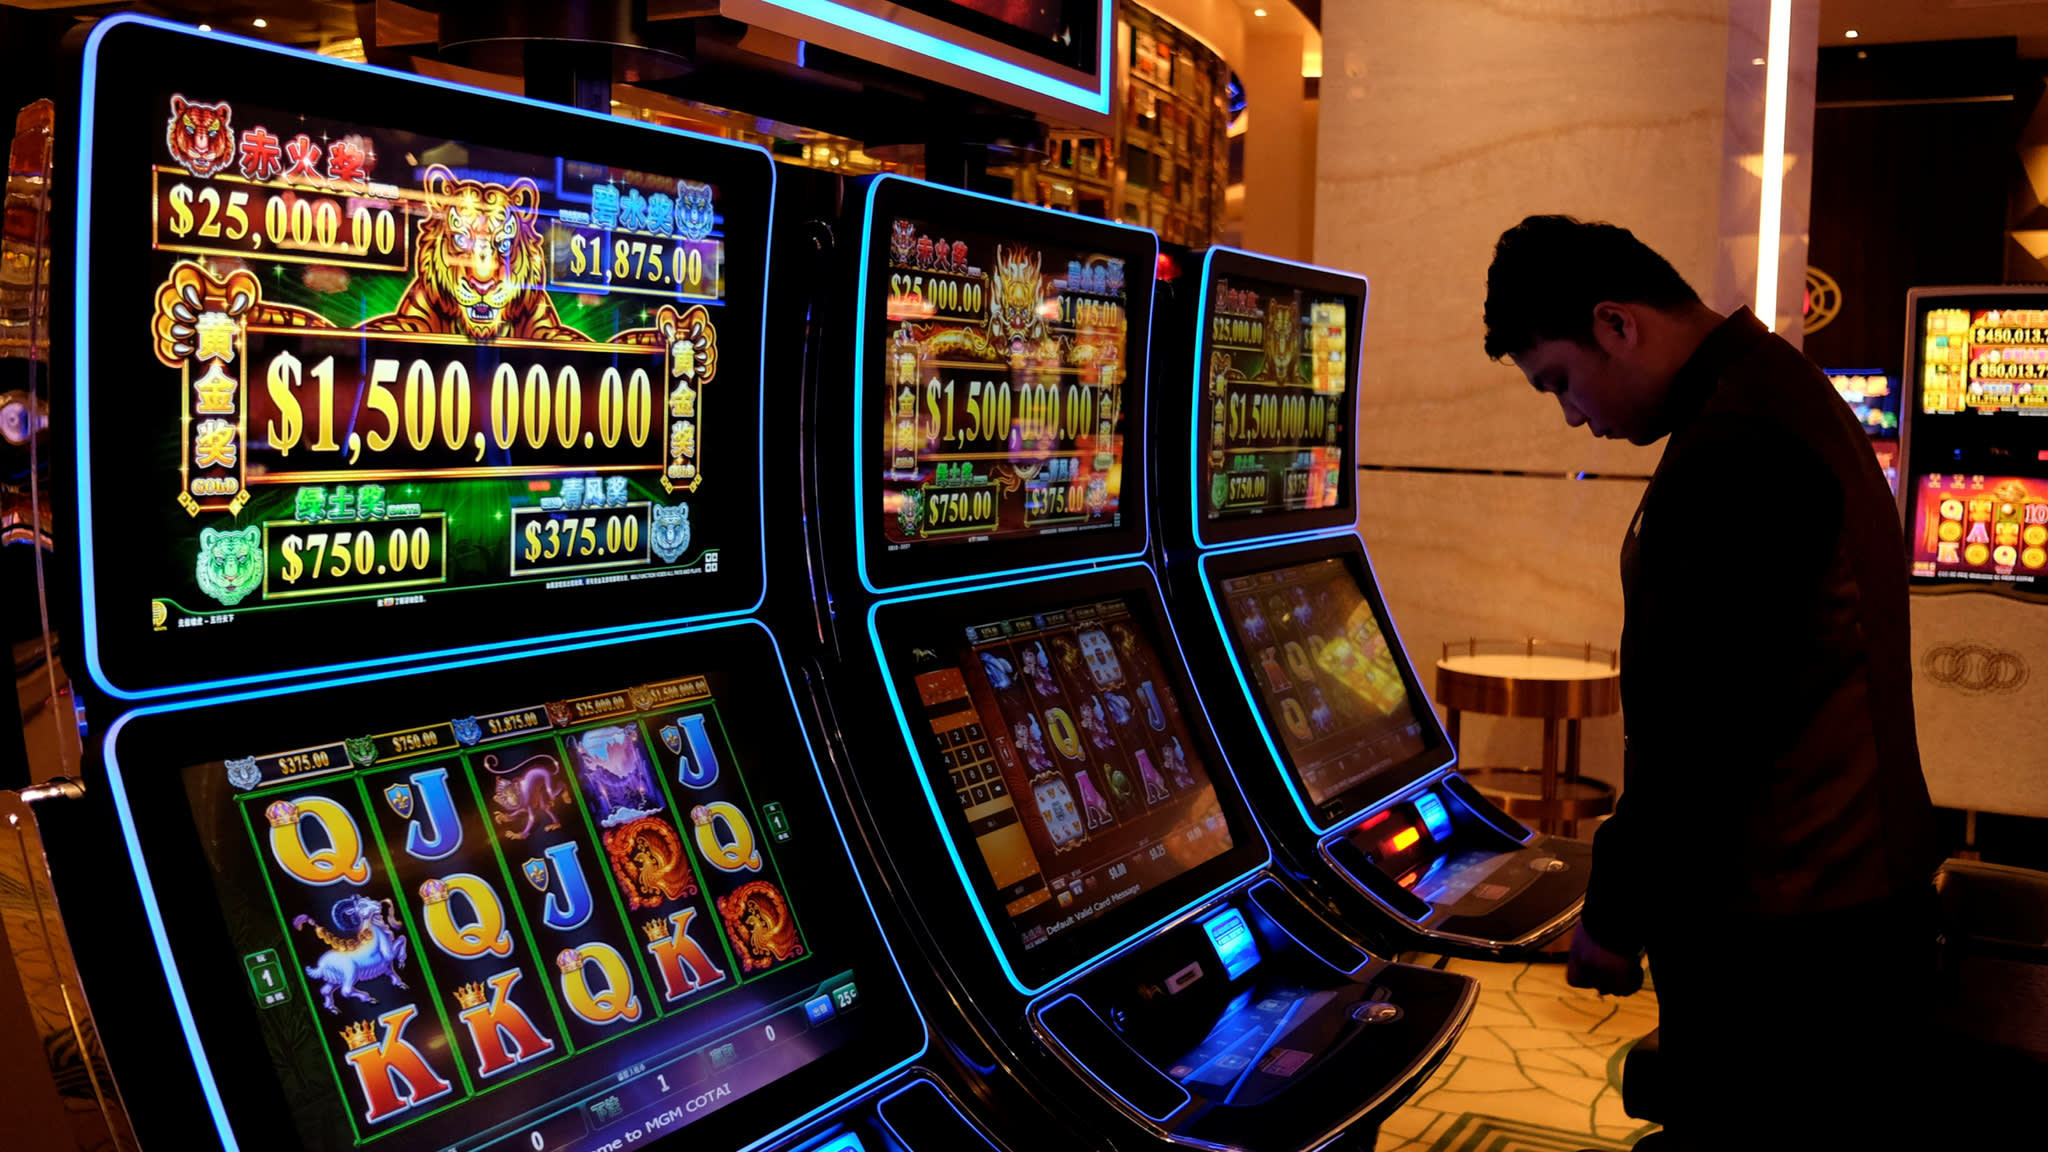 Oklahoma Governor Favors Commercial Casinos over Tribal Properties